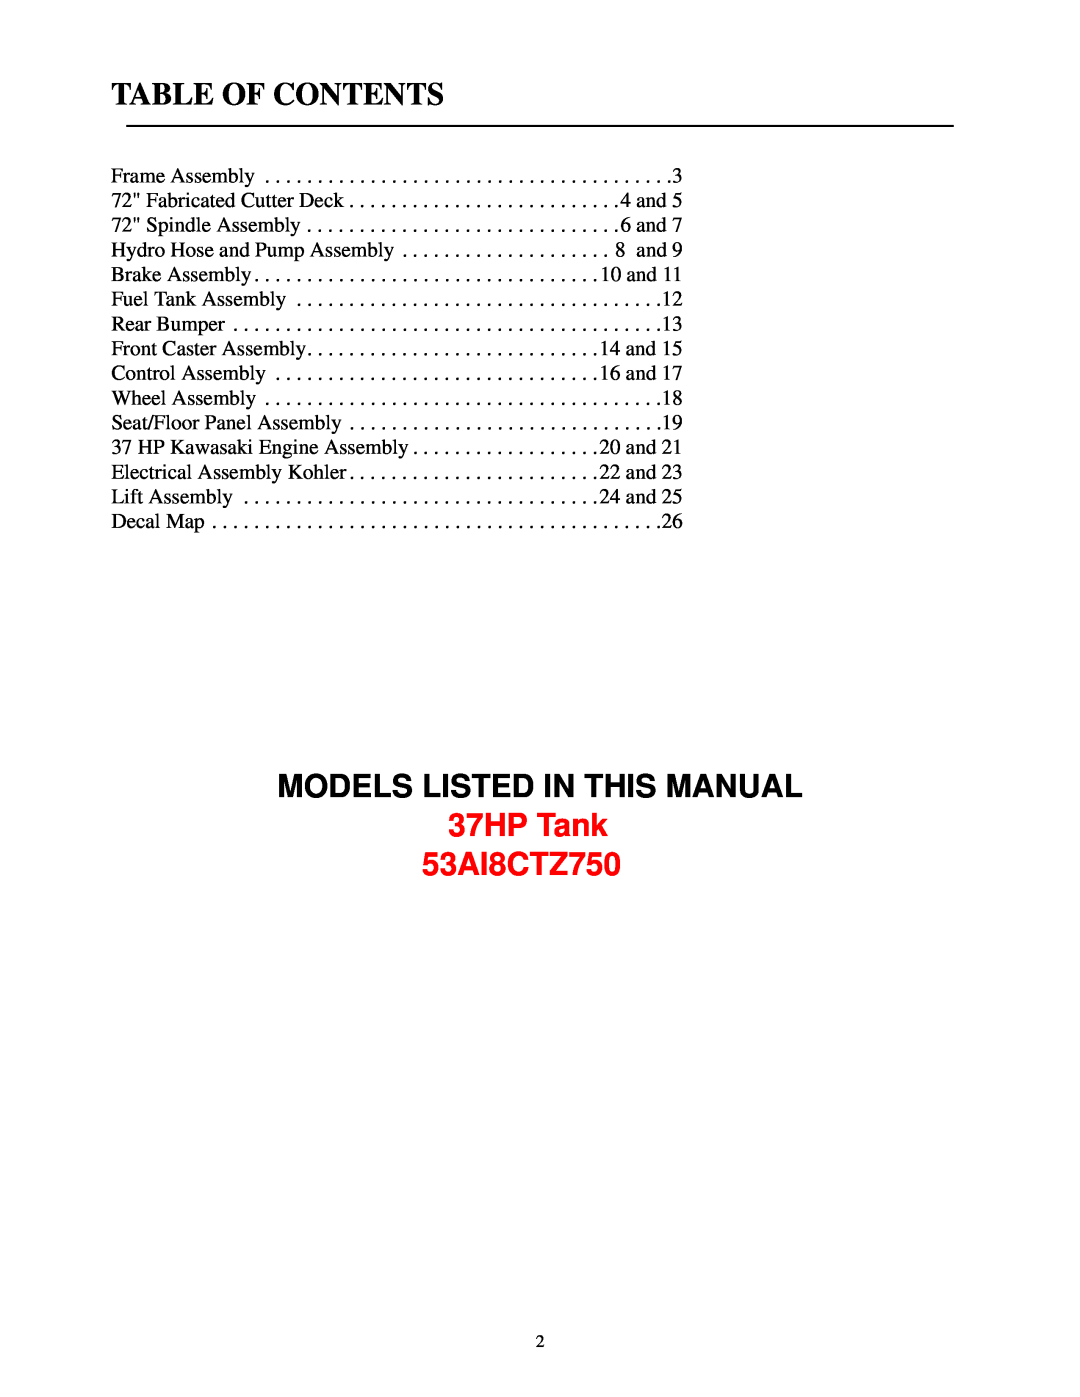 Cub Cadet manual Table Of Contents, Models Listed In This Manual, 37HP Tank 53AI8CTZ750 